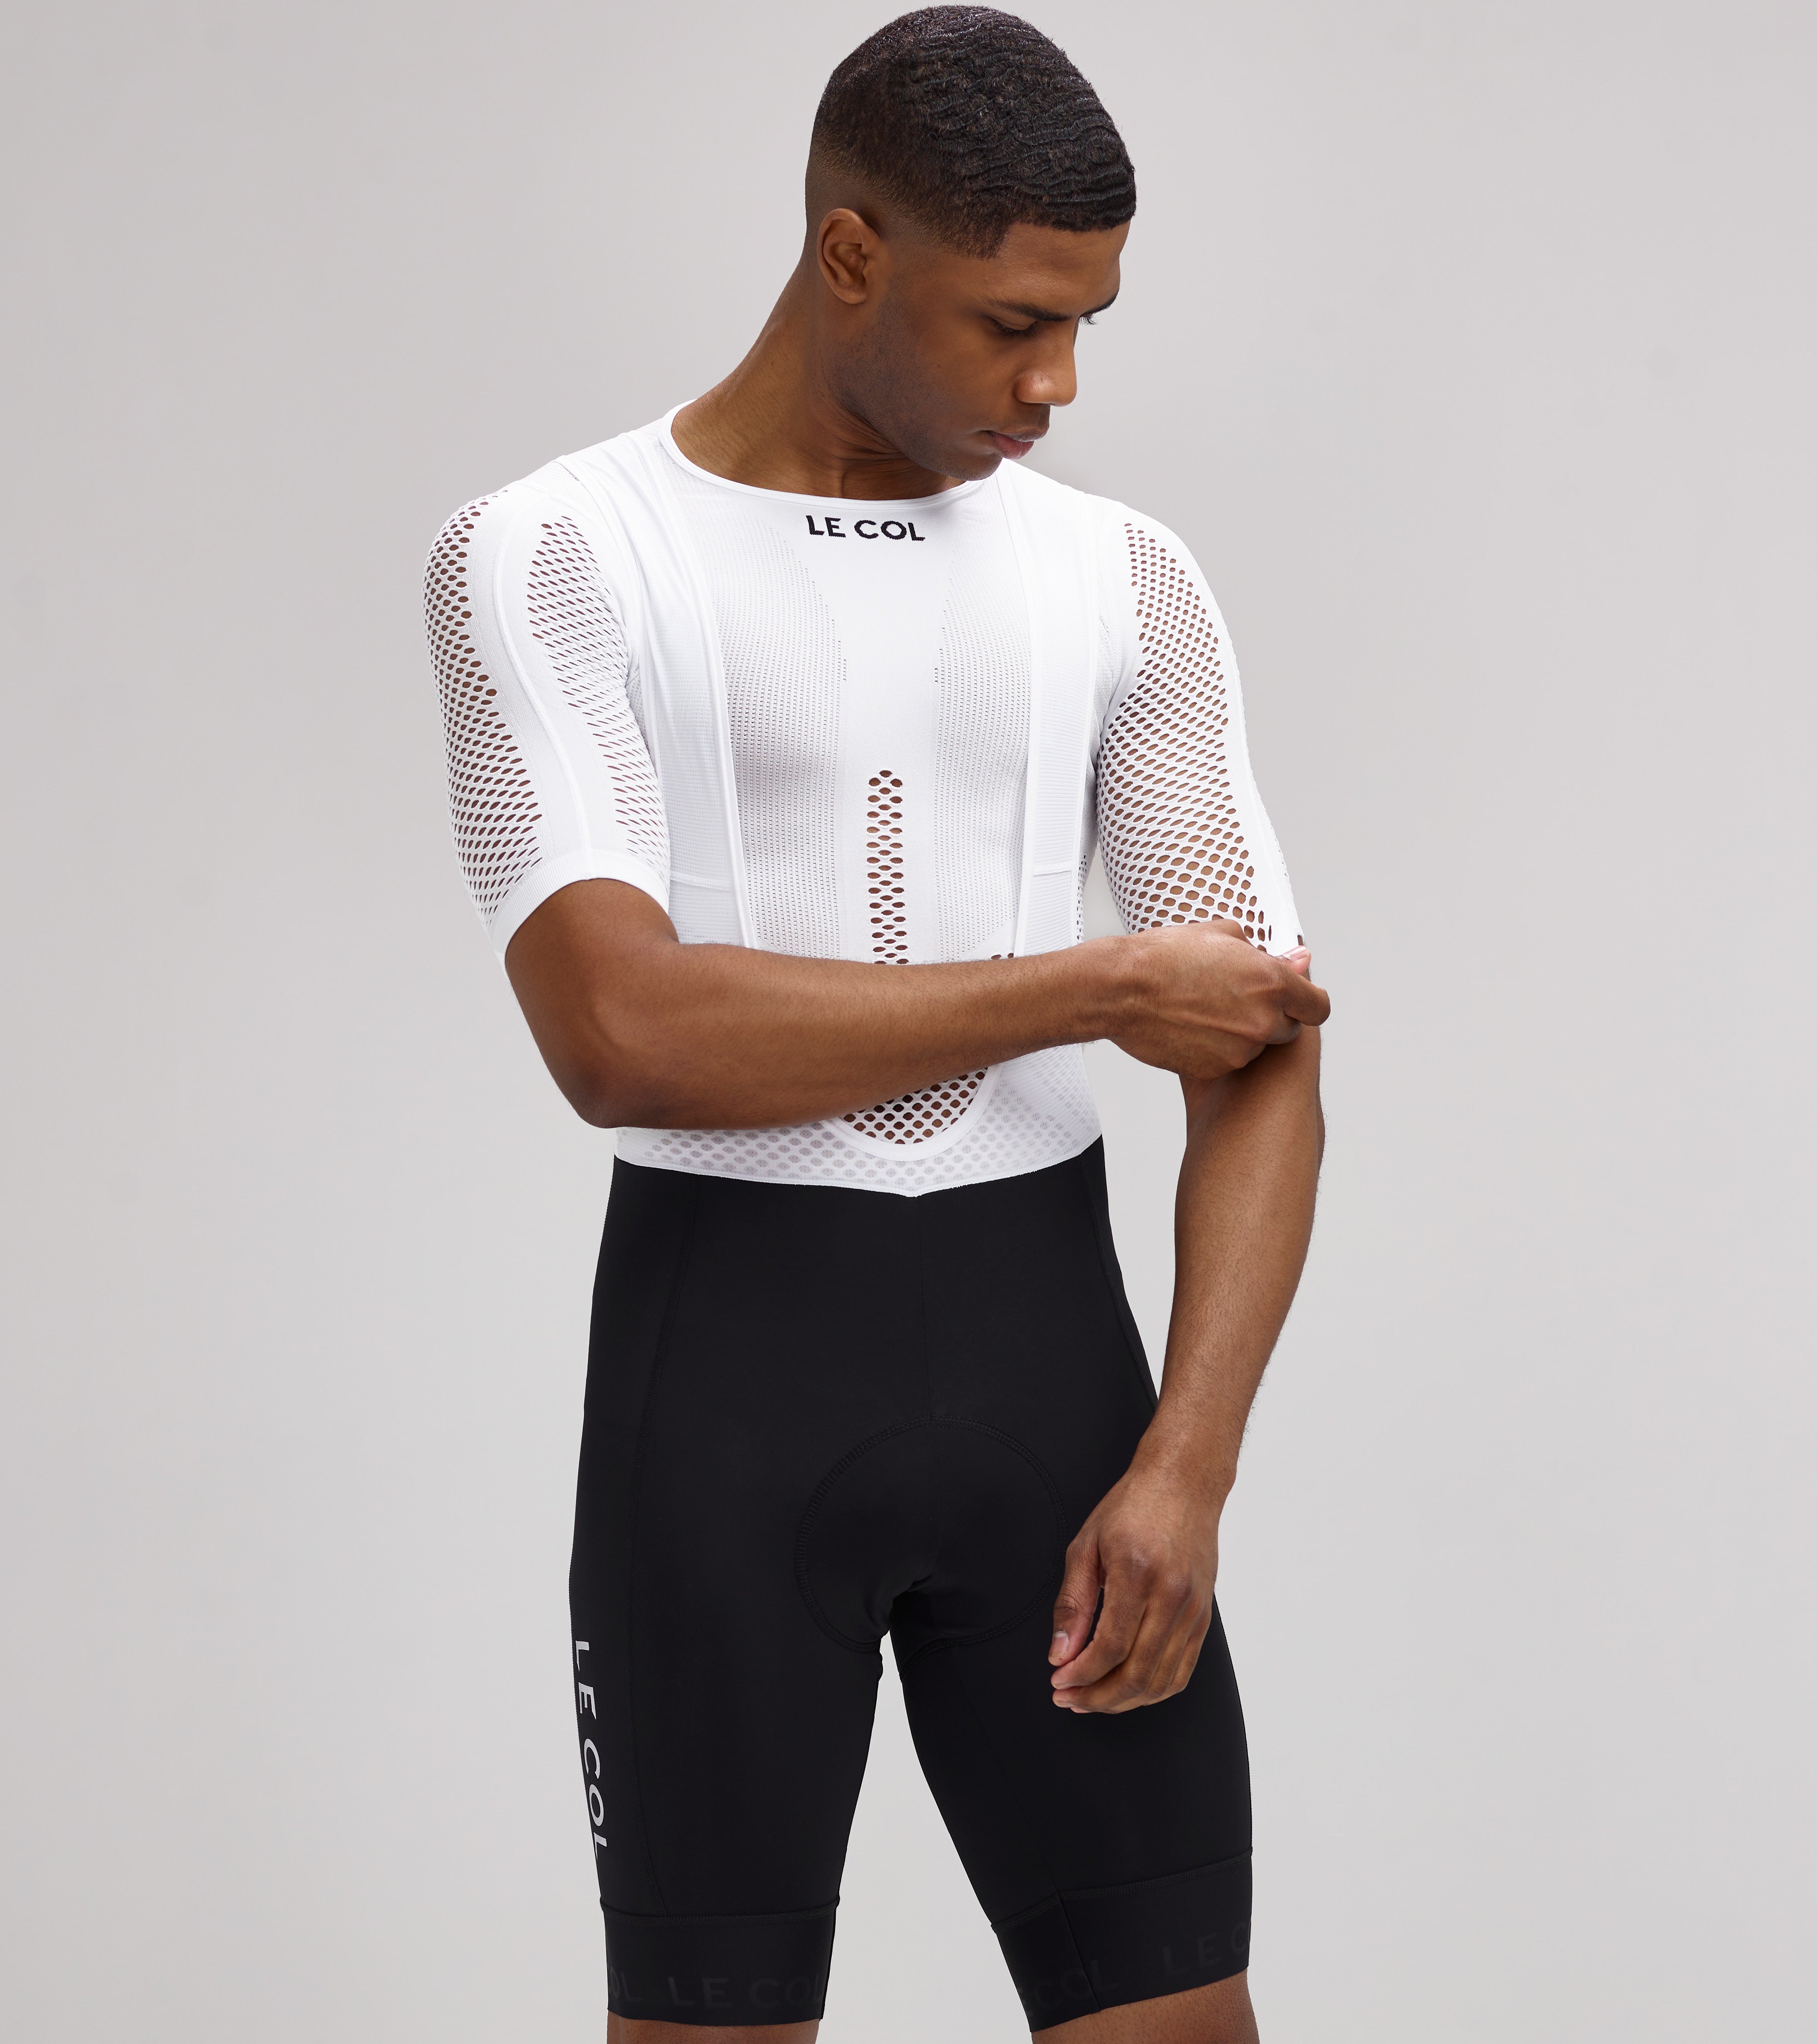 Le Col | Pro Mesh Short Sleeve Base Layer | Le Col Cycling